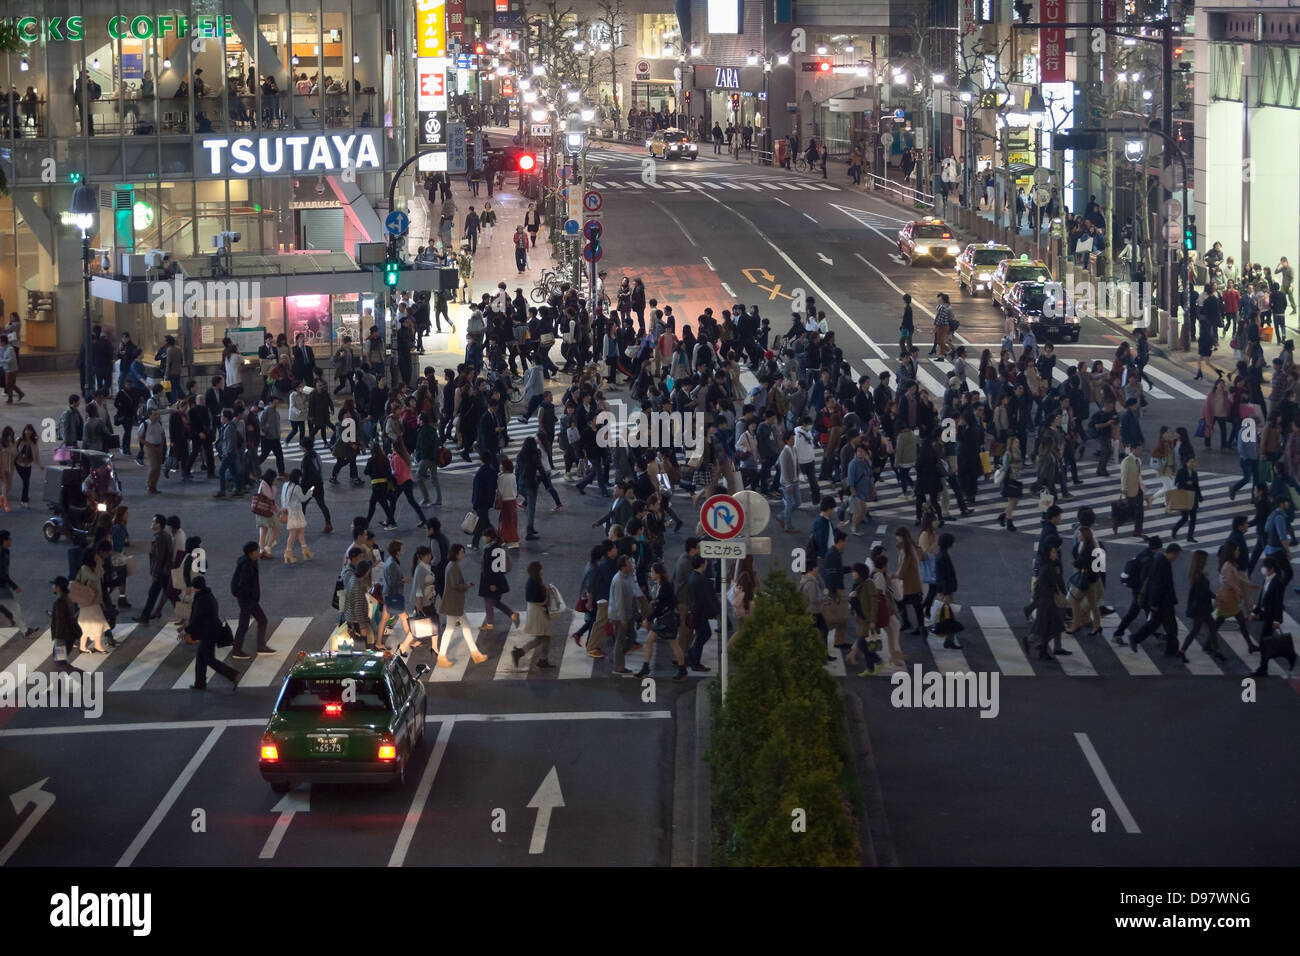 Shibuya Crossing is famous place for scramble crossing in Tokyo city, Japan. Night view. People passing a road Stock Photo